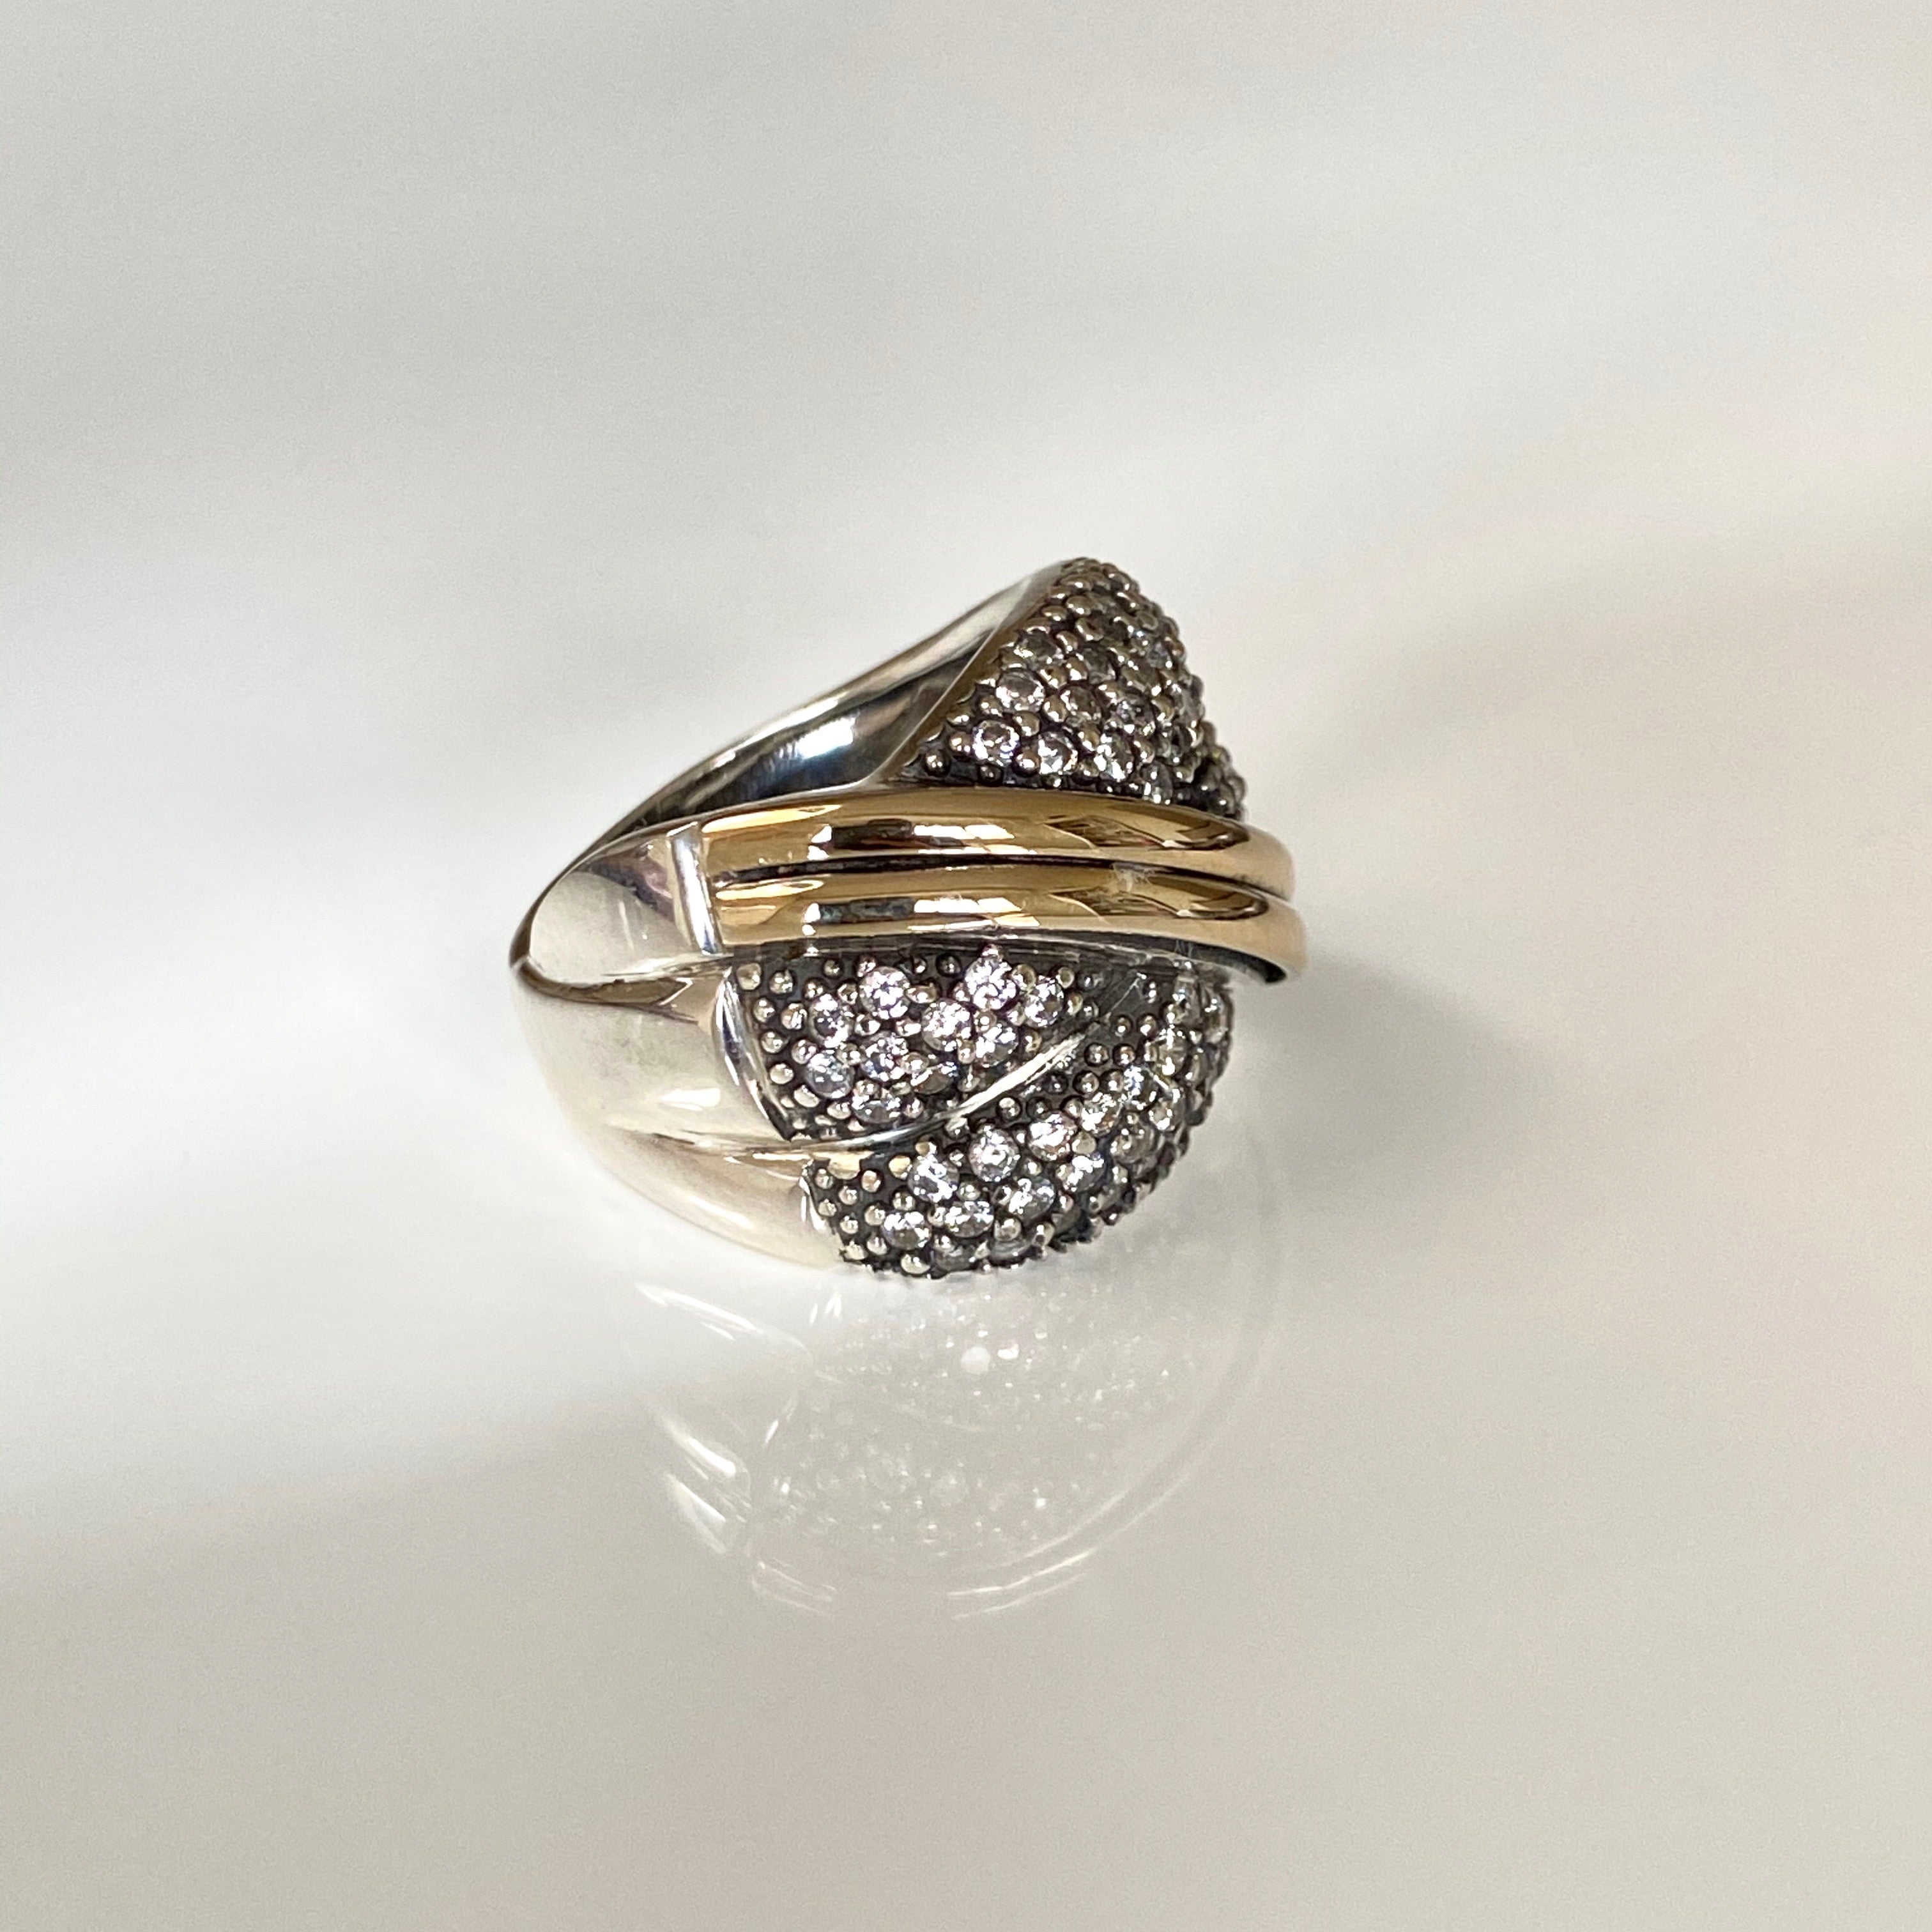 INFINITY RING - Sterling Silver & 14k Yellow Gold-Tayroni